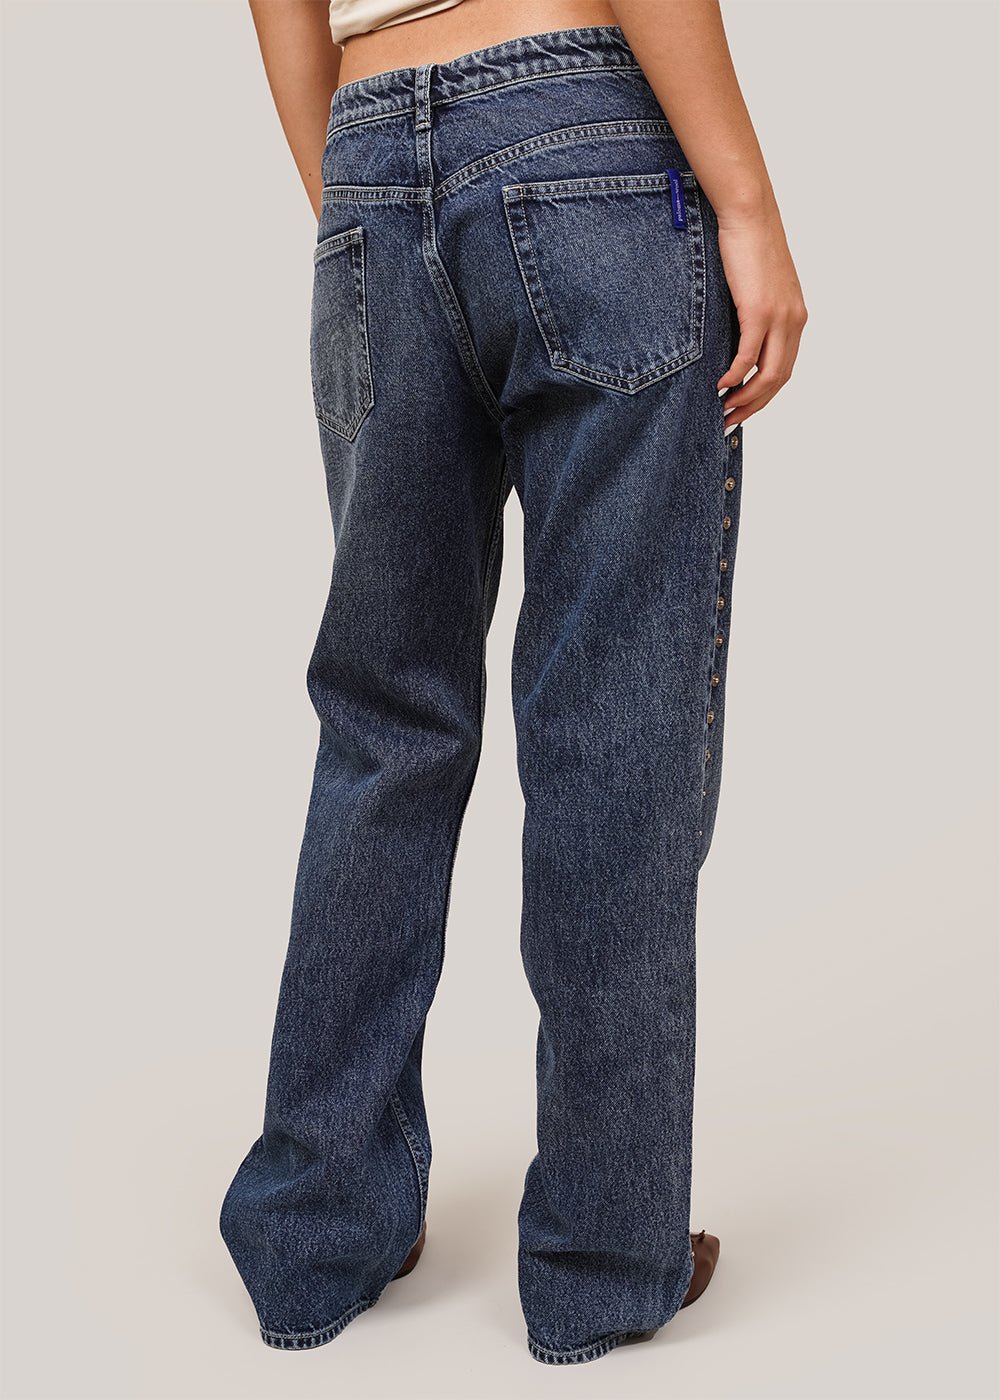 5xl Womens Jeans - Buy 5xl Womens Jeans Online at Best Prices In India